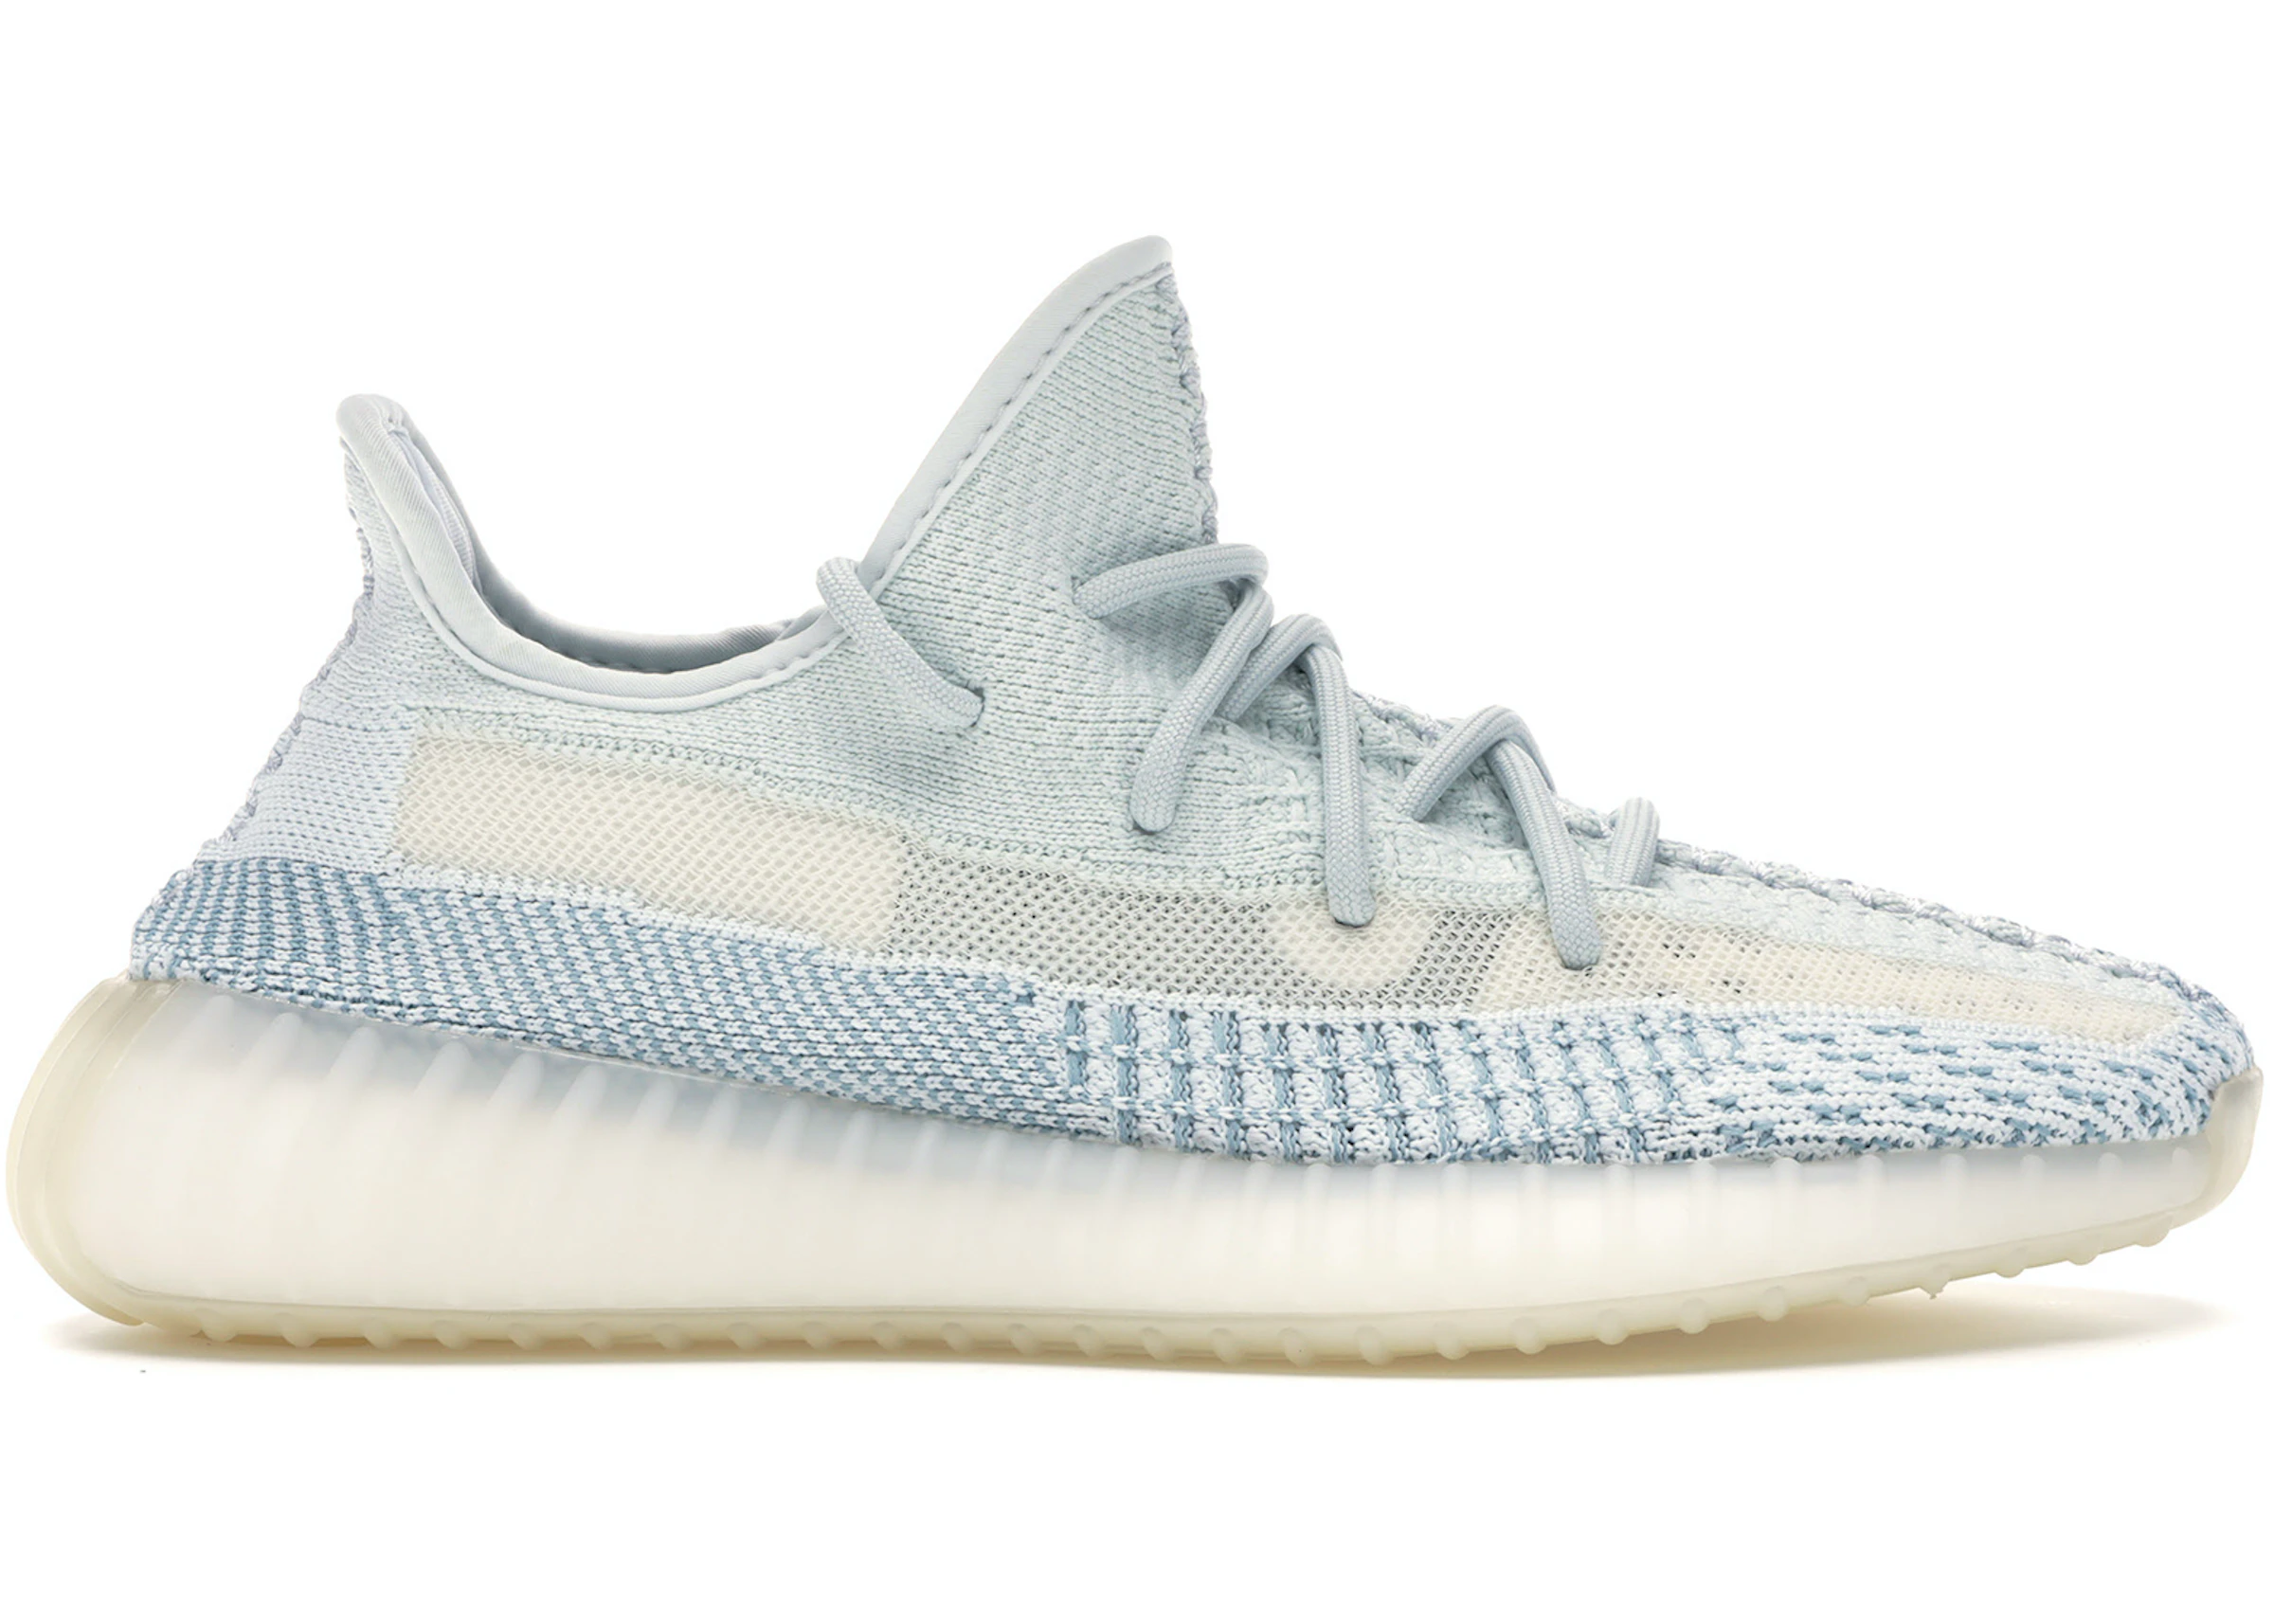 clothing format Eve adidas Yeezy Boost 350 V2 Cloud White (Non-Reflective) - FW3043 - US